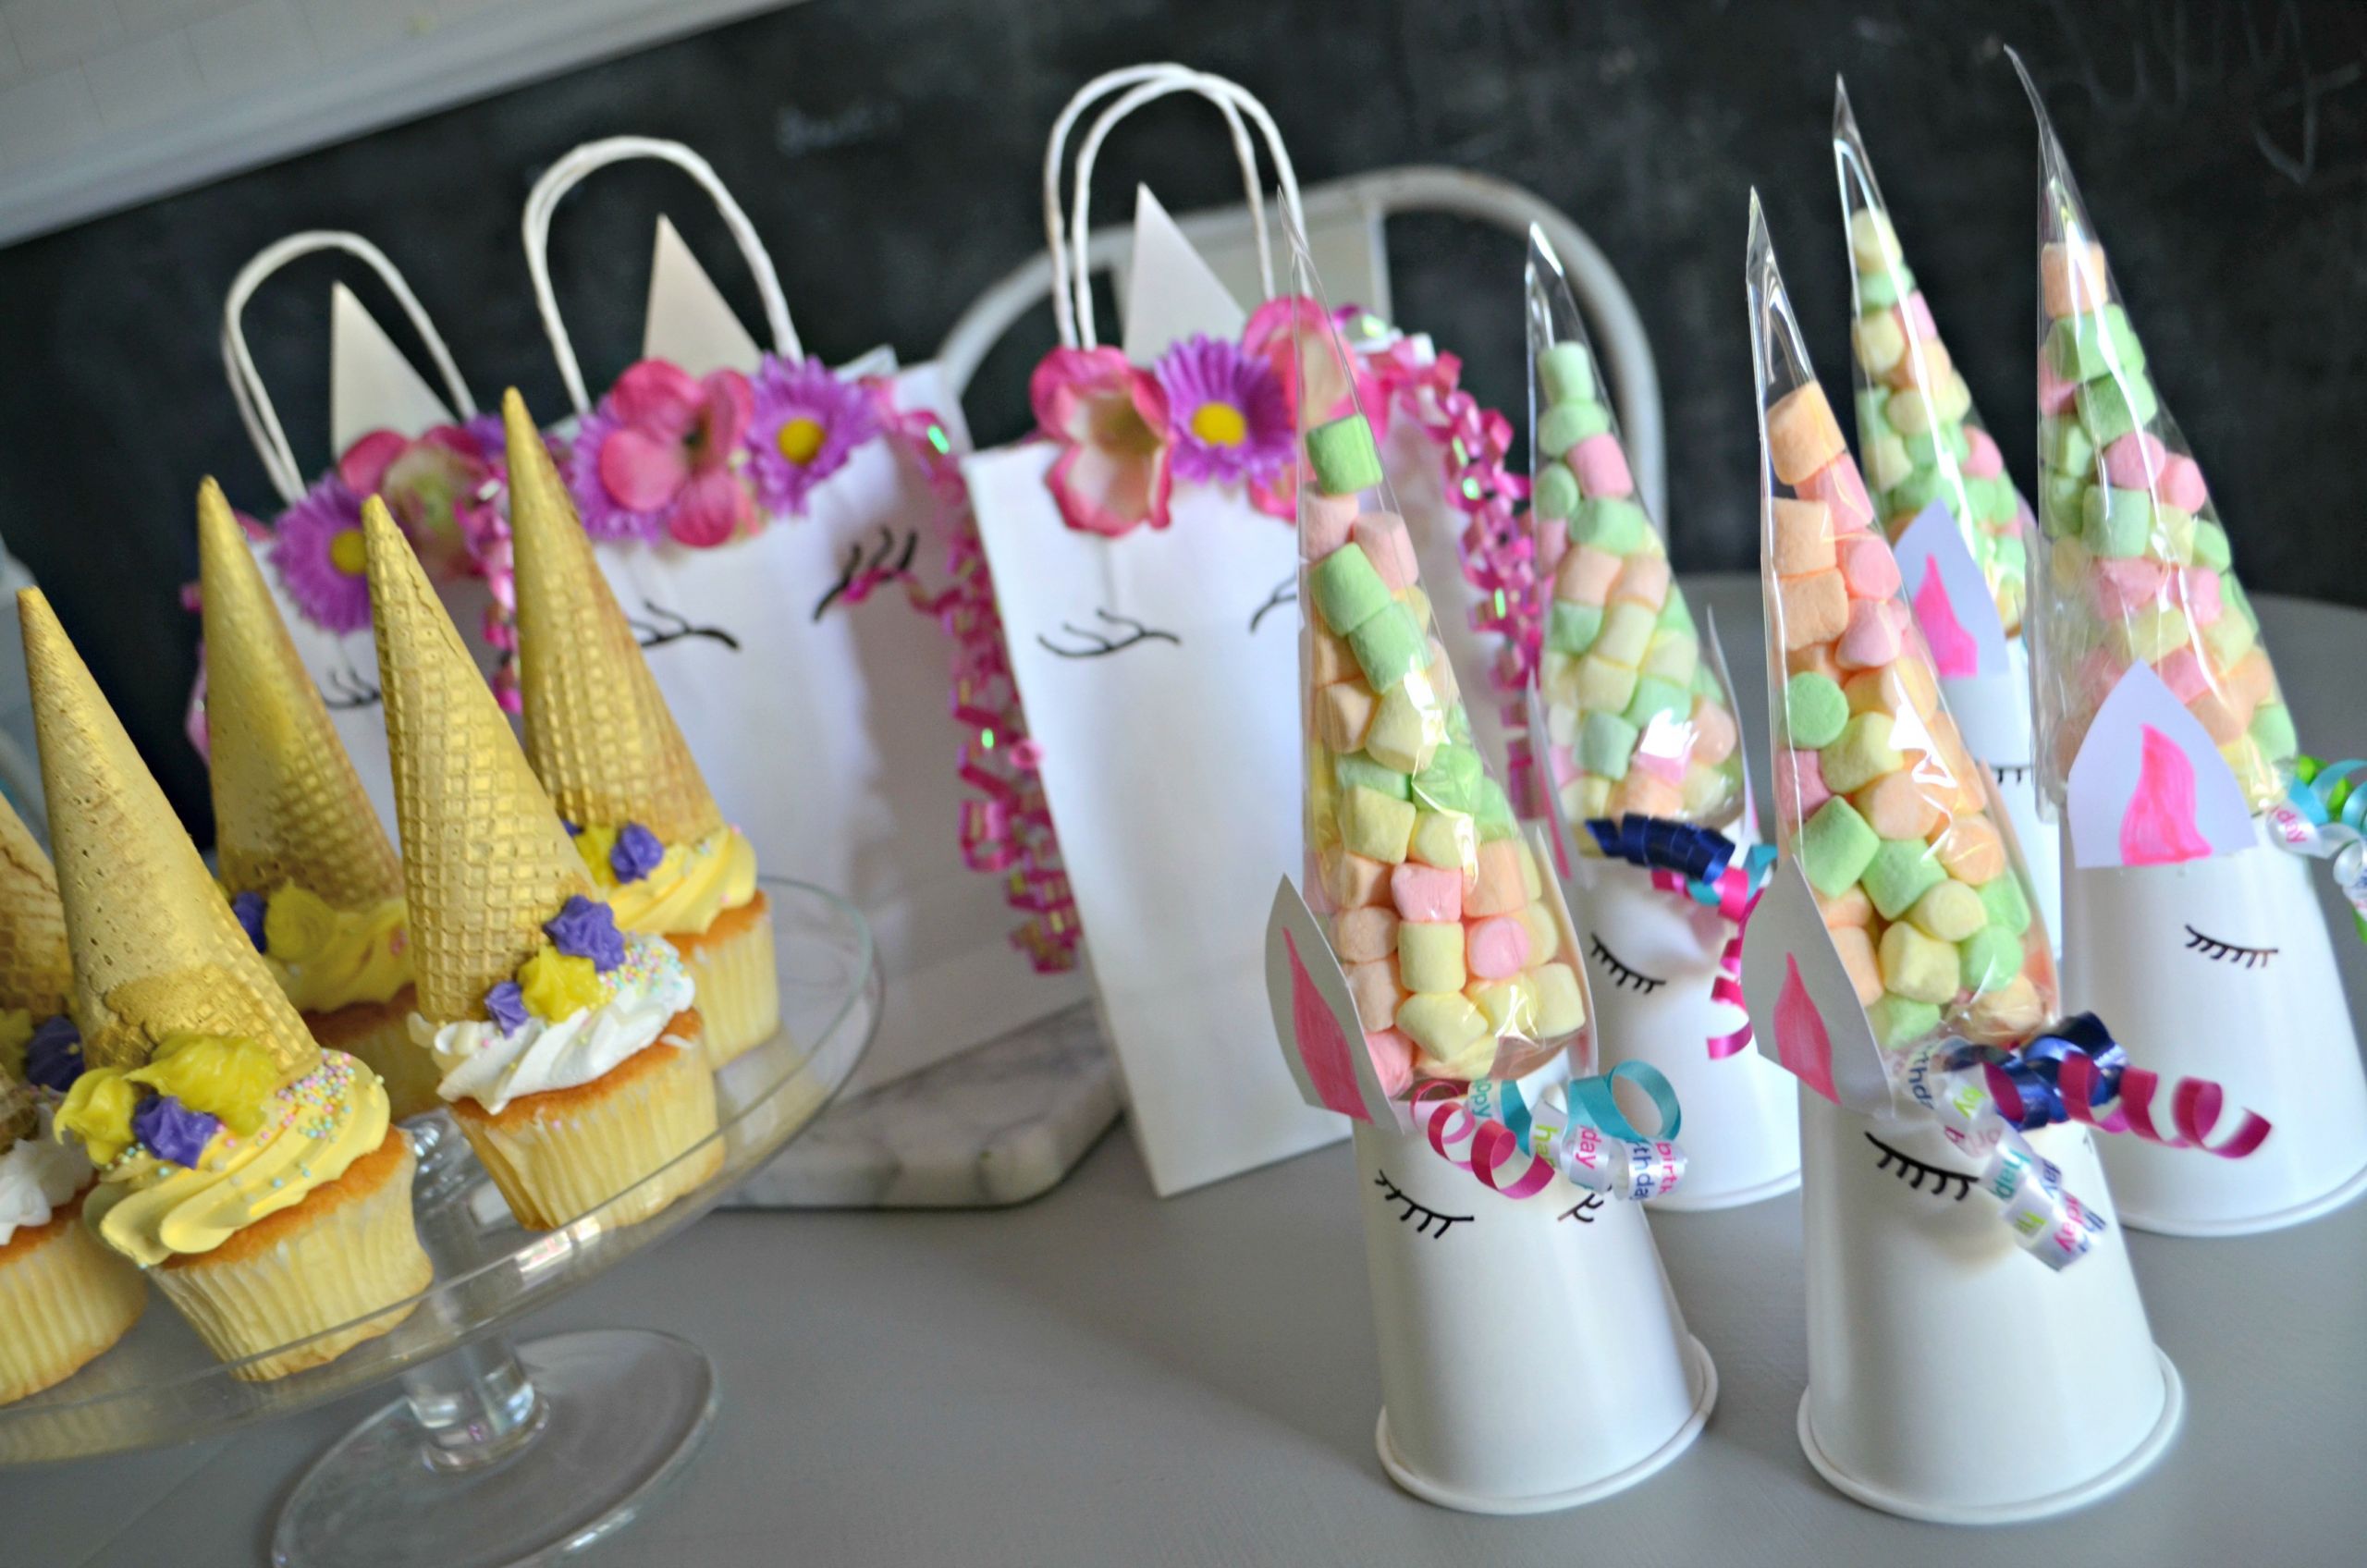 Party Decorations DIY
 Make These 3 Frugal Cute and Easy DIY Unicorn Birthday